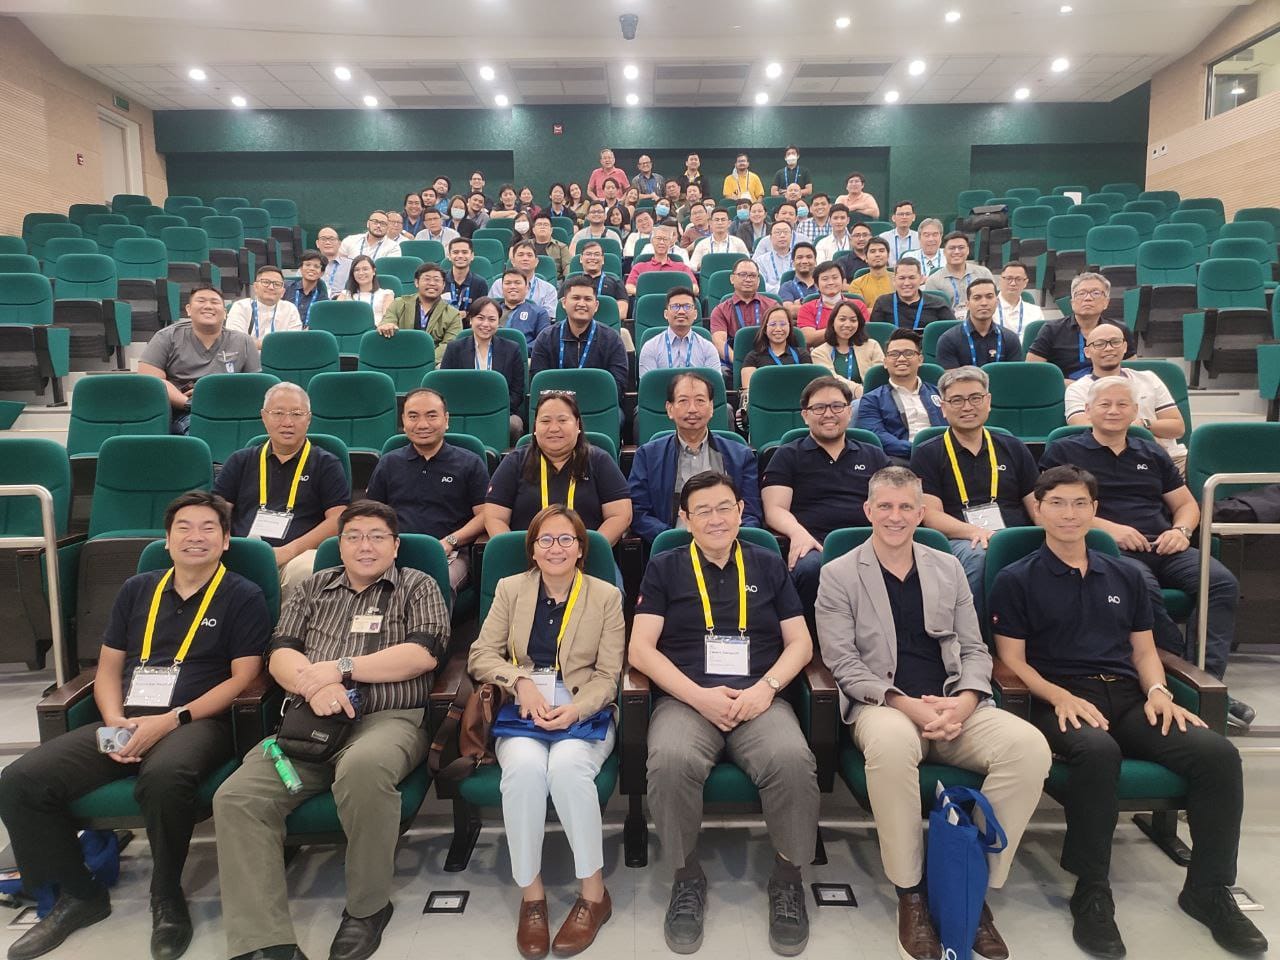 Surgeons in the Philippines meet to discuss multidisciplinary care for patients with fragility fractures